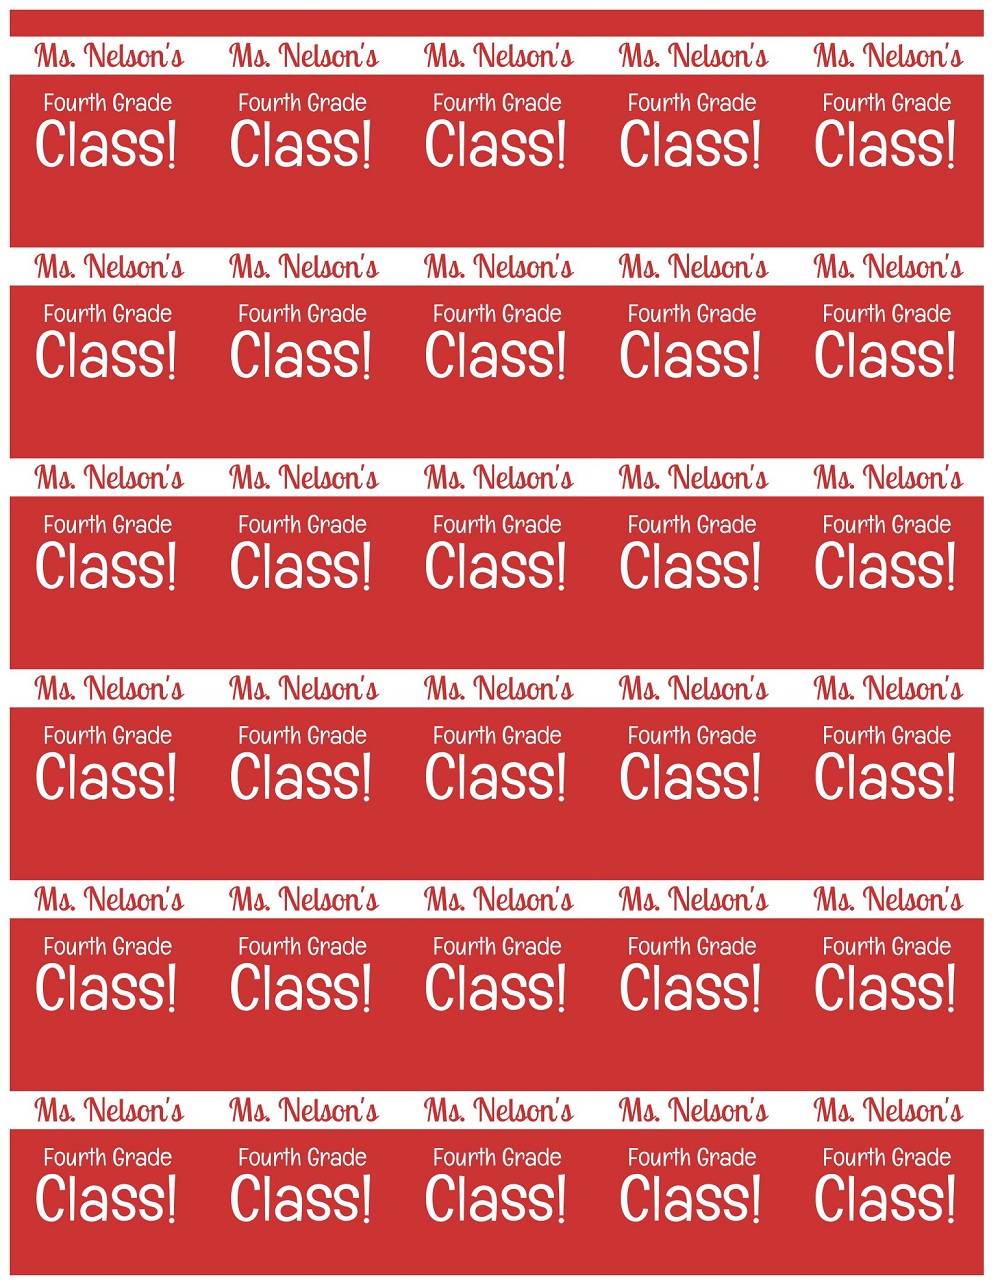 Classroom Hand Sanitizer Label Template